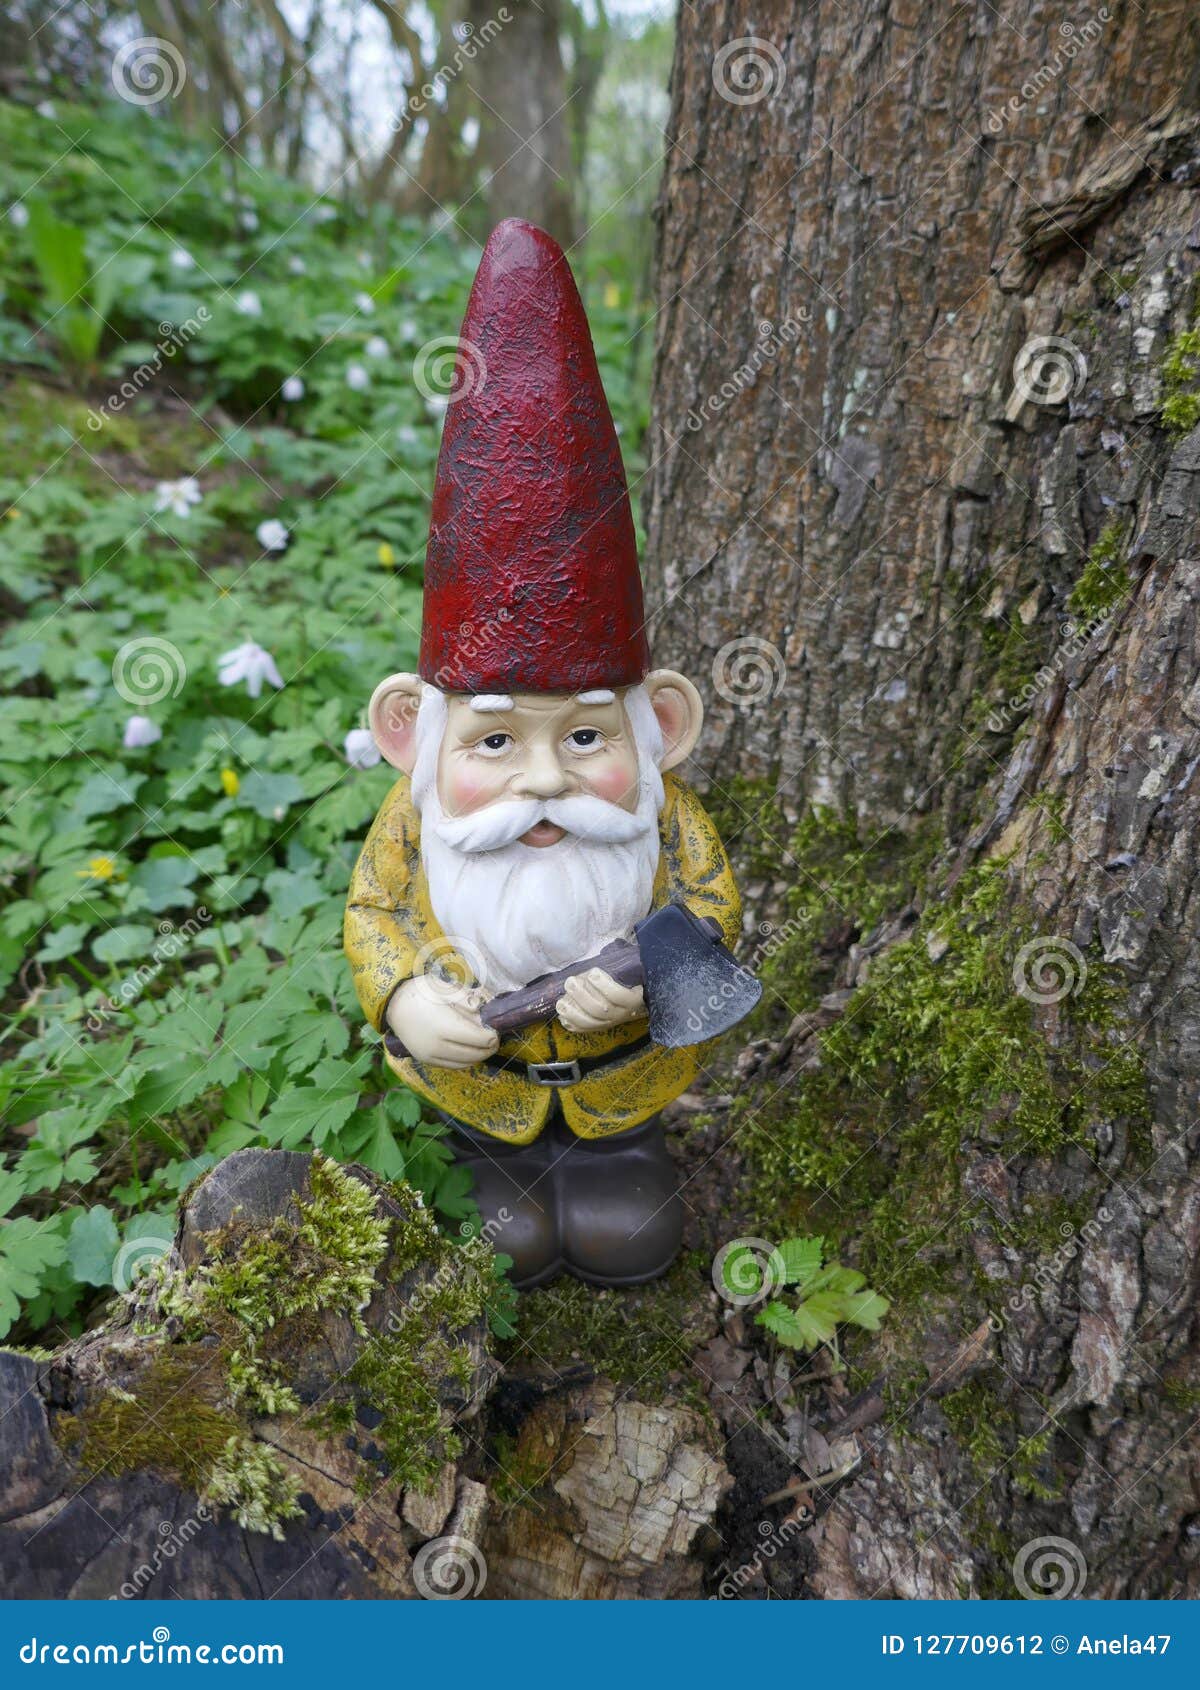 Garden Gnome in the forest stock photo. Image of forest - 127709612